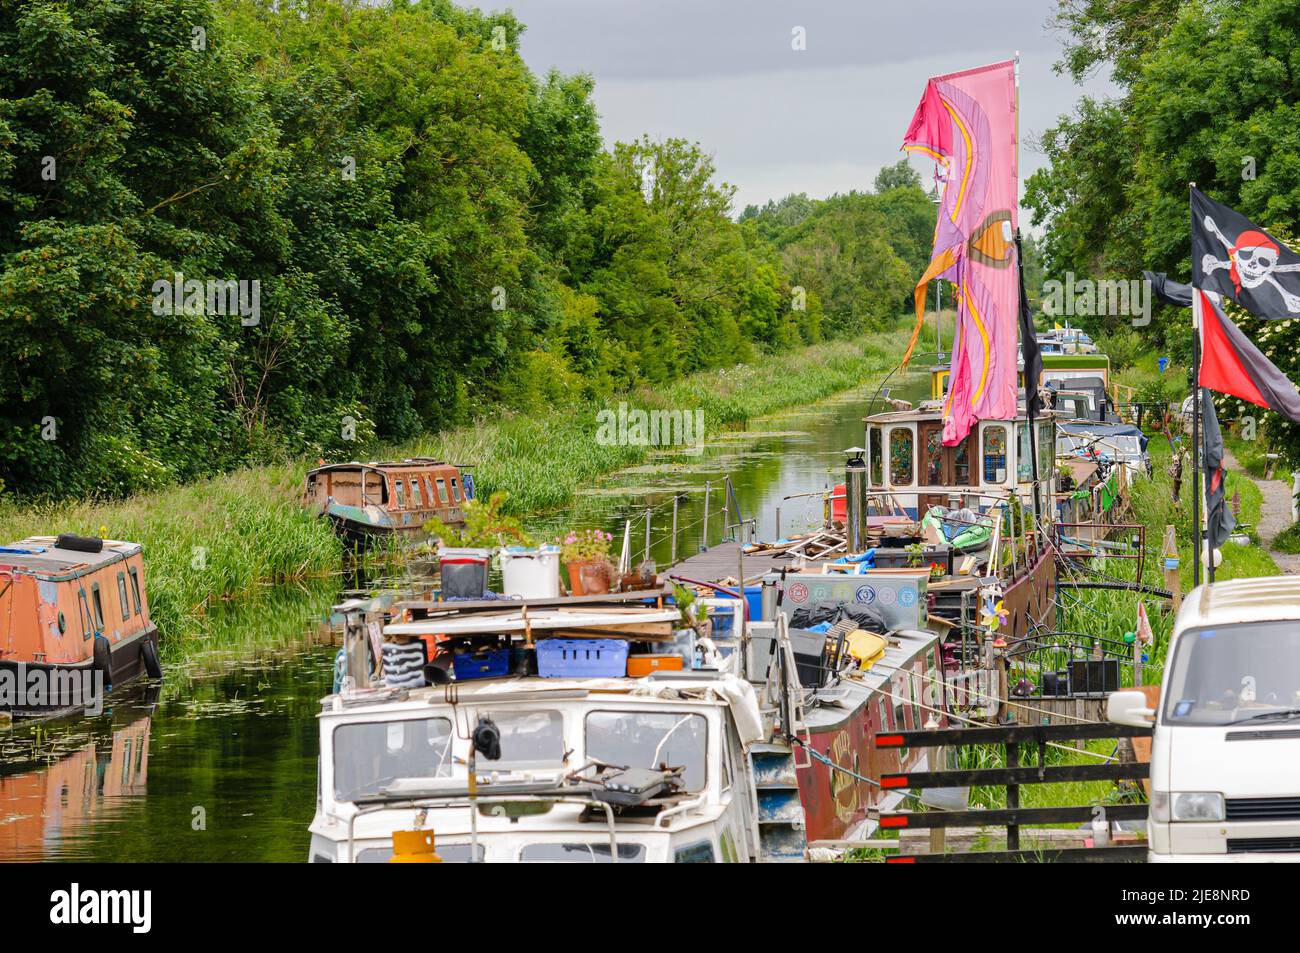 Canalboats houseboats on a canal in County Laoise, Republic of Ireland Stock Photo